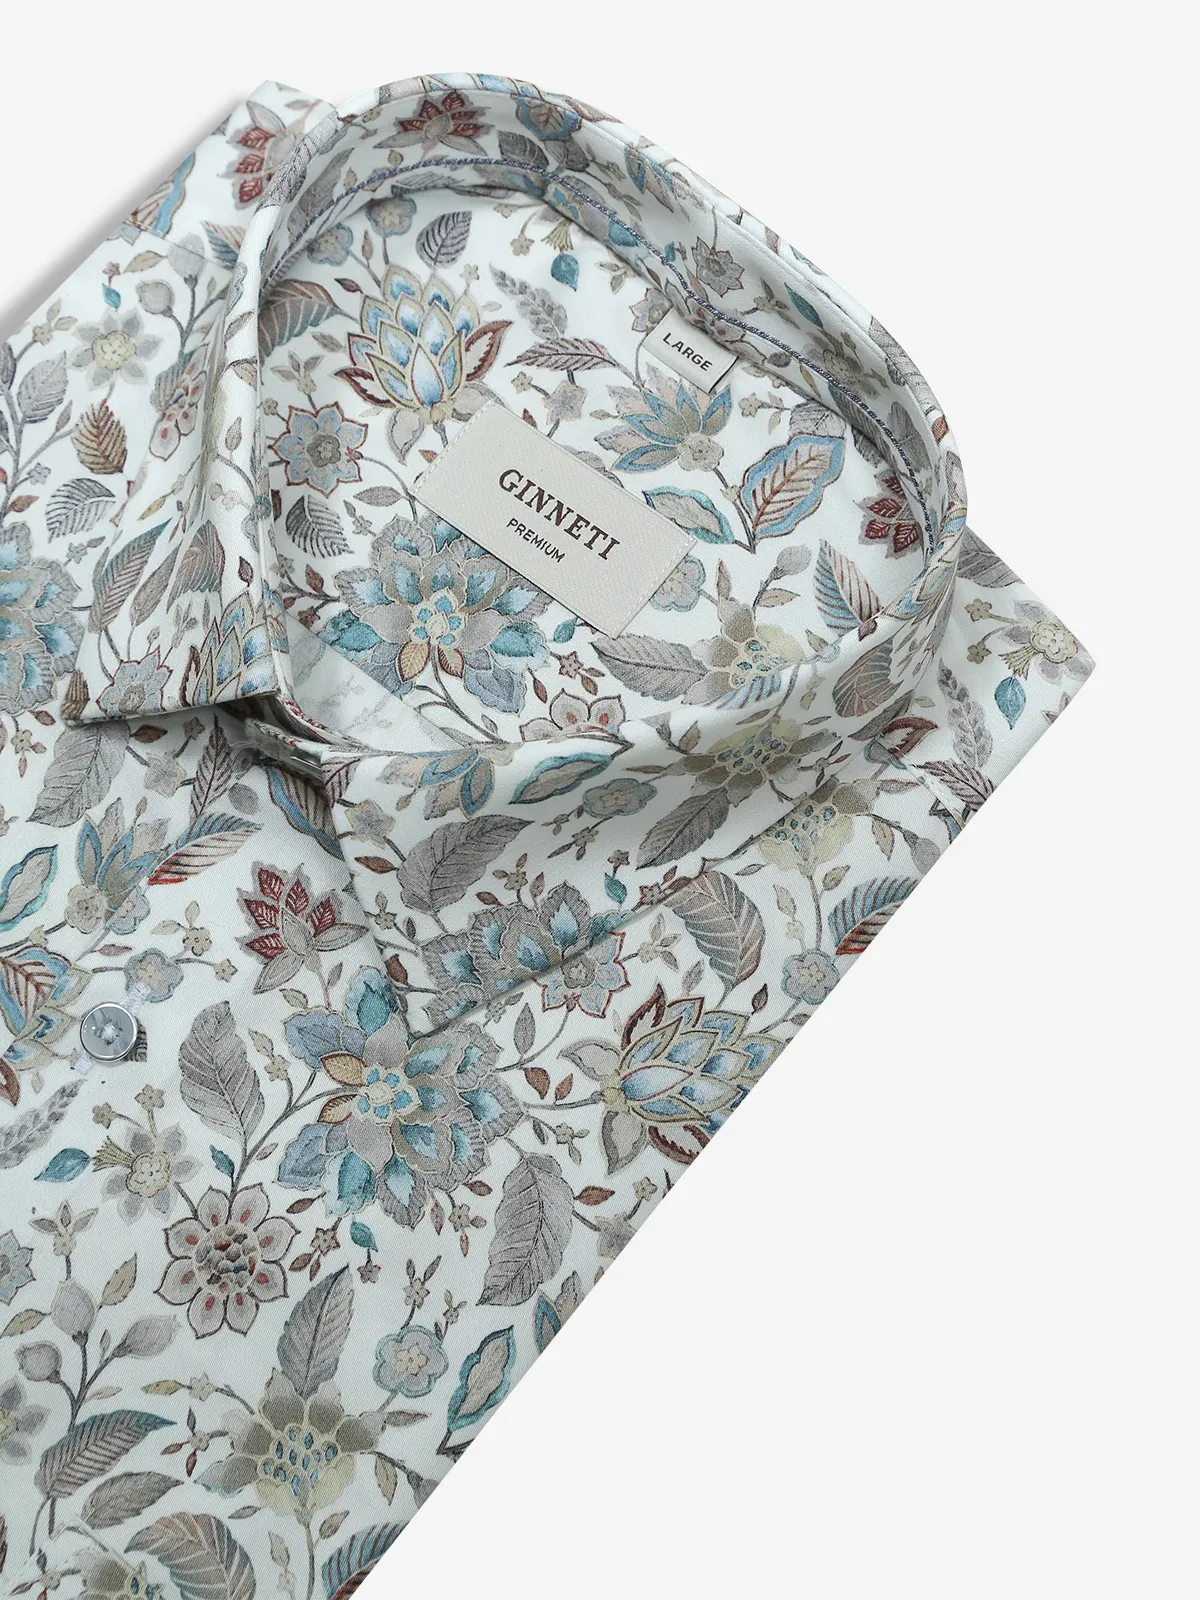 GINNETI white printed shirt for partywear